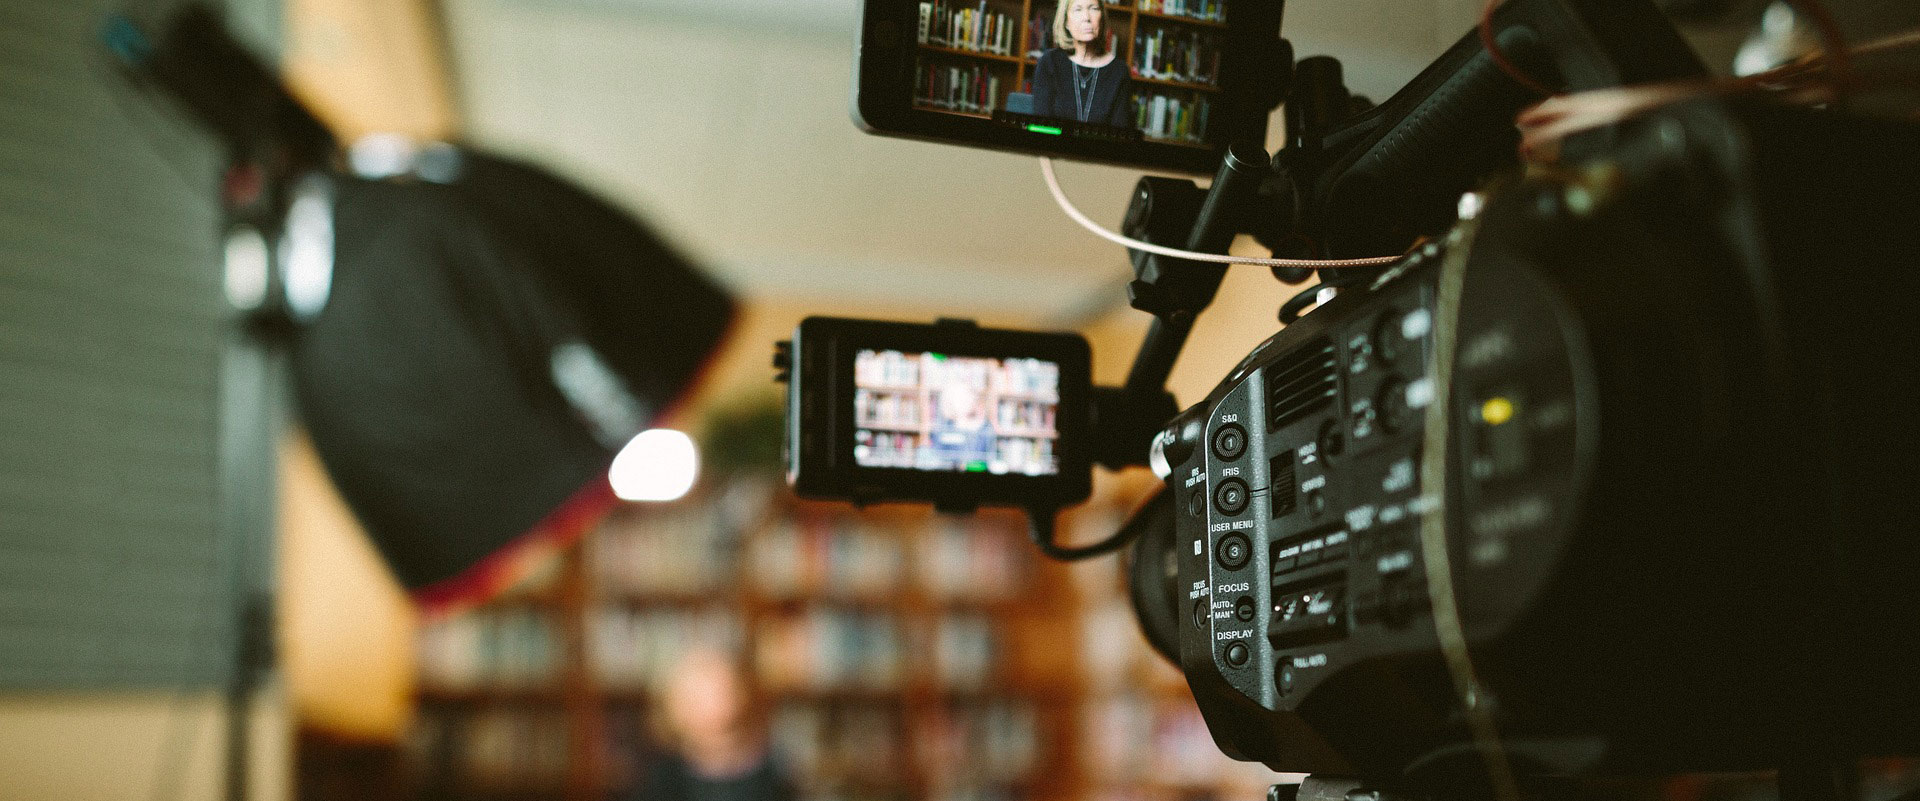 Four Benefits of Video in Your Marketing Strategy